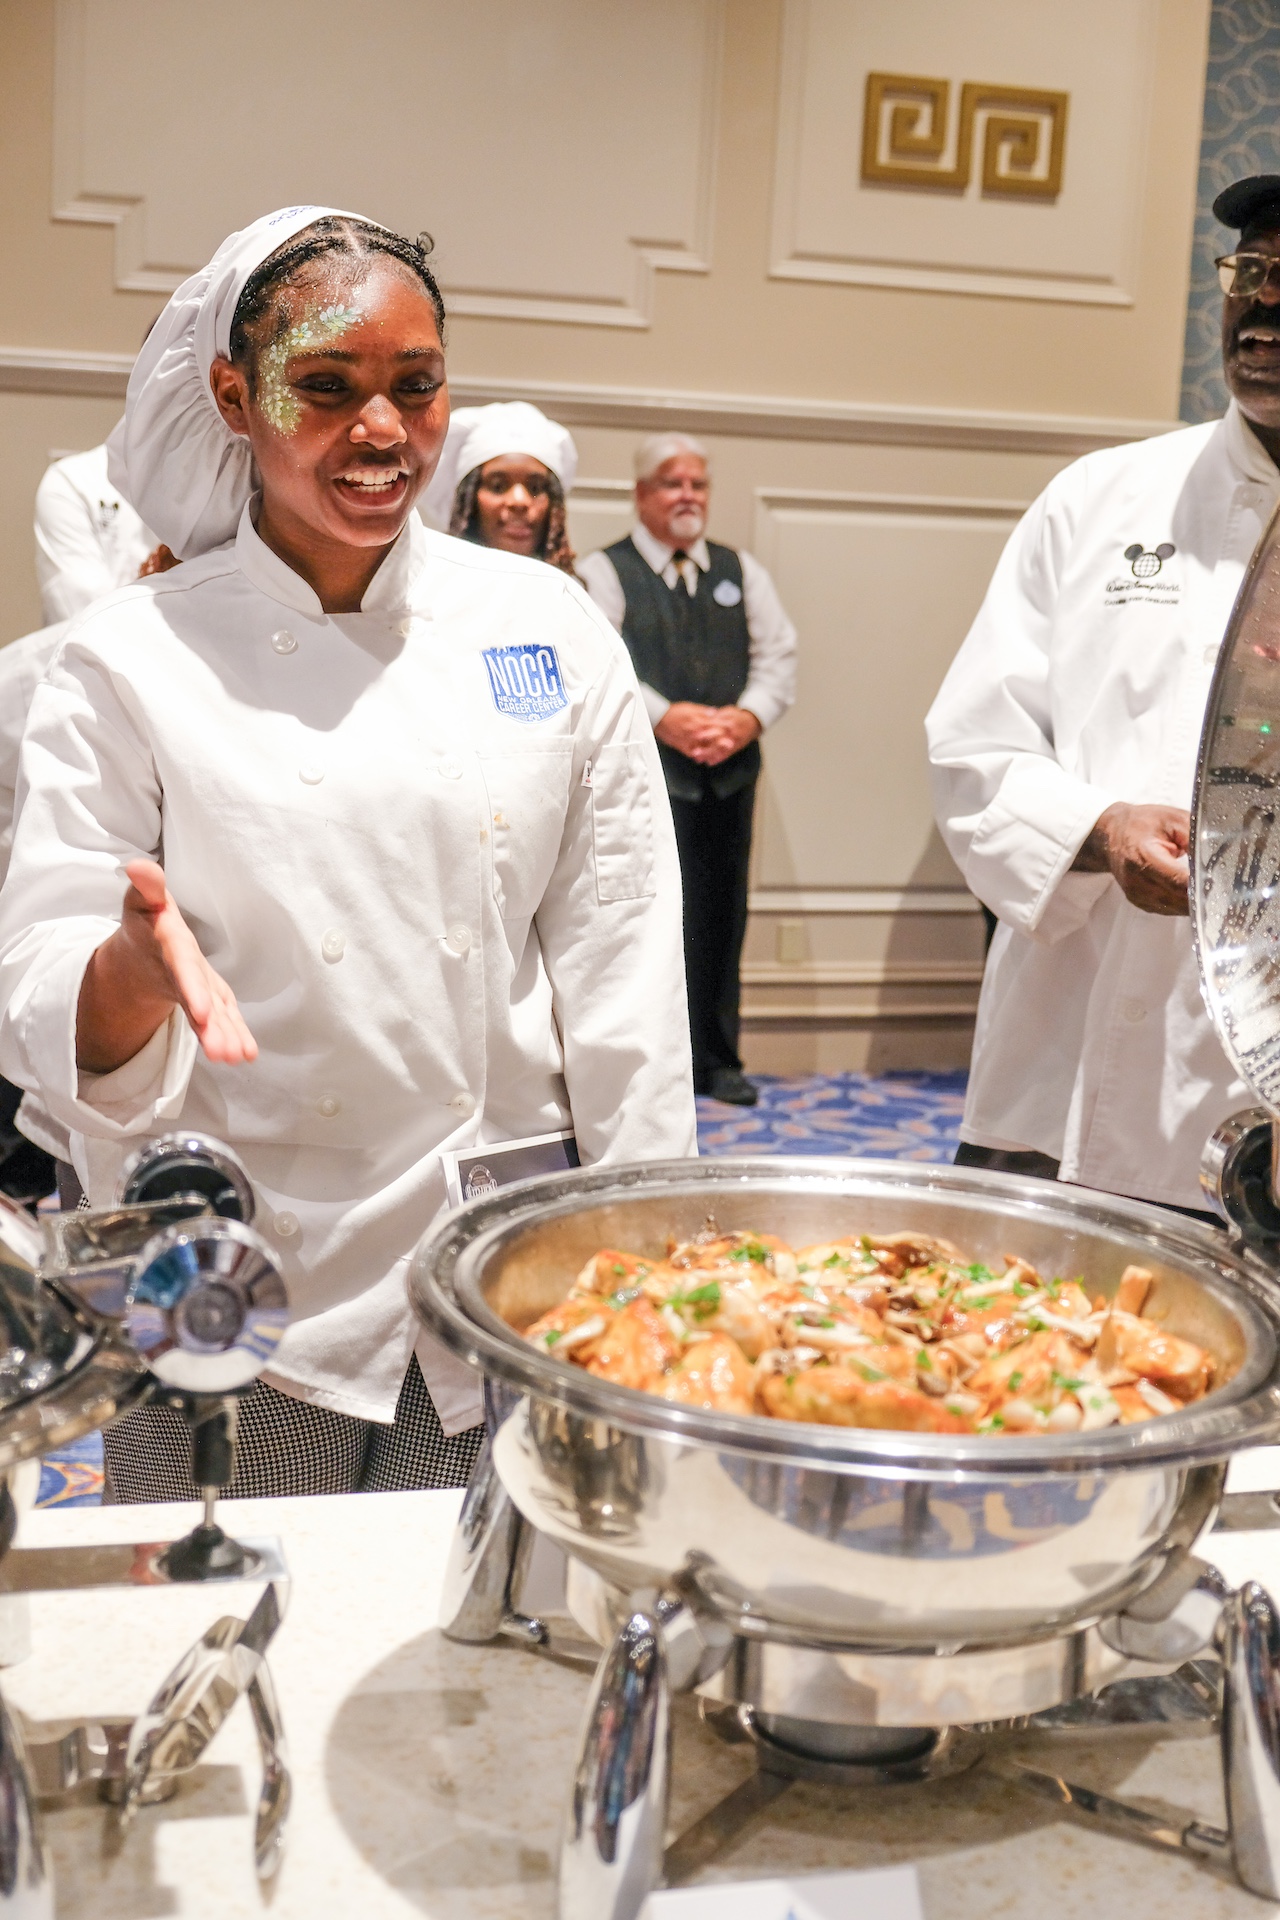 One of the visiting aspiring chefs showcases a dish to her fellow tripmates and members of the Disney culinary team.